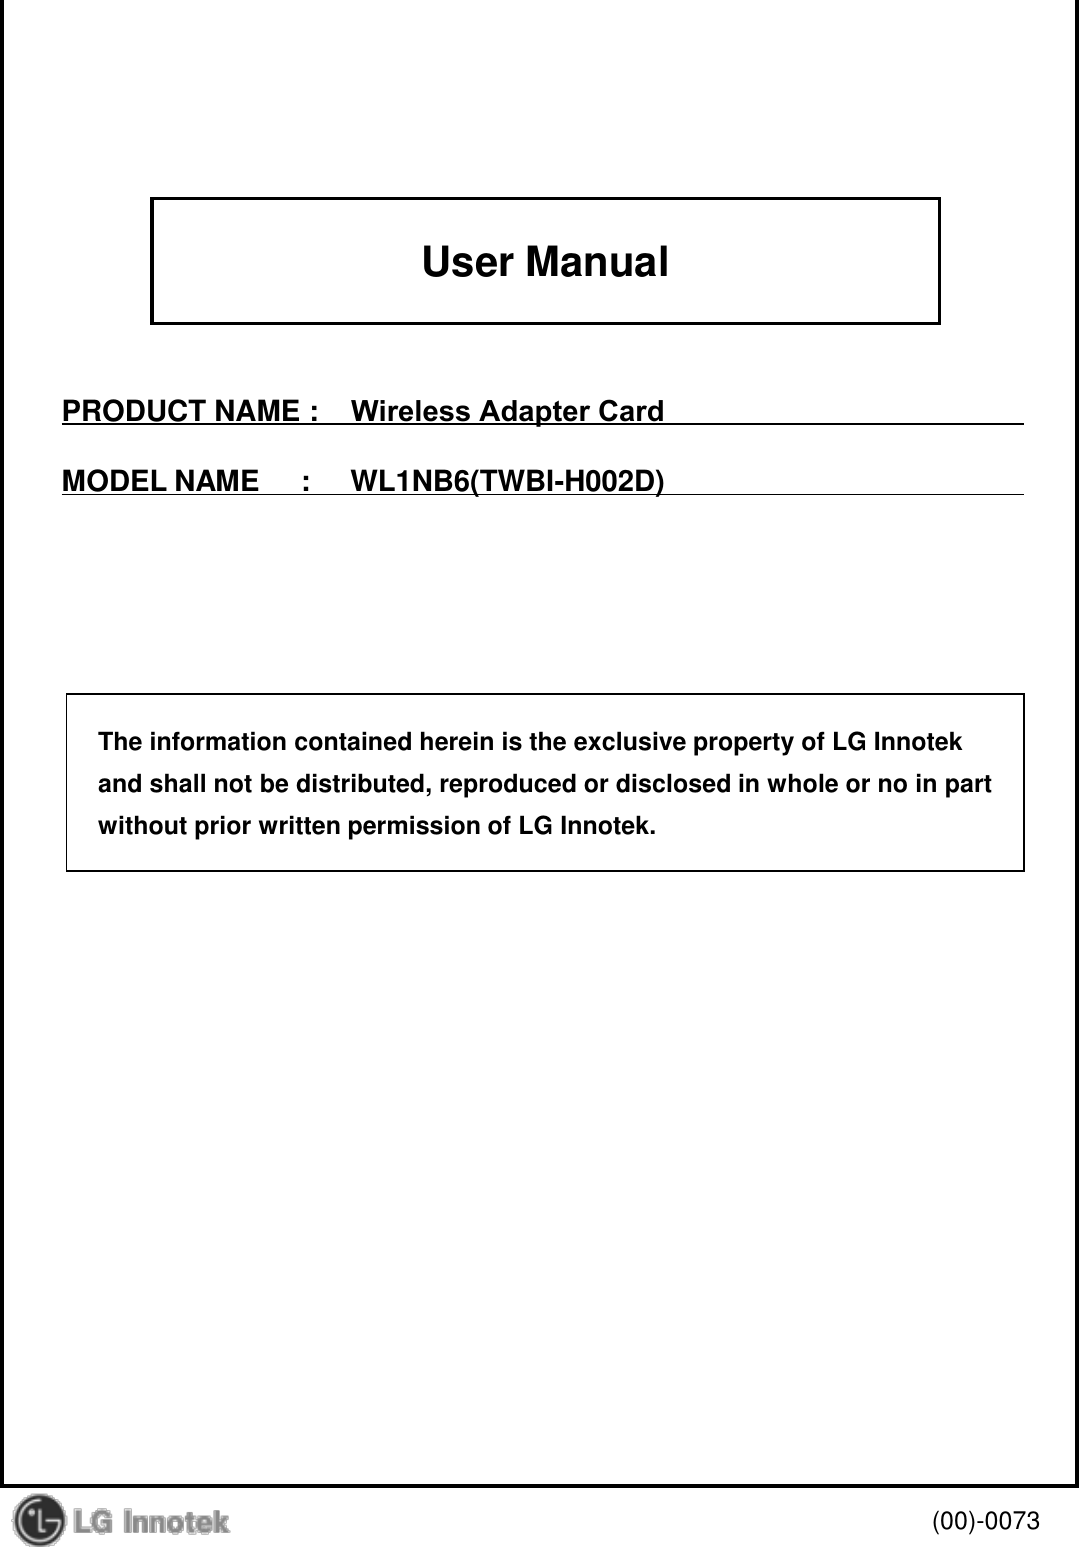 User Manual PRODUCT NAME :    Wireless Adapter Card MODEL NAME     :     WL1NB6(TWBI-H002D) (00)-0073 The information contained herein is the exclusive property of LG Innotek and shall not be distributed, reproduced or disclosed in whole or no in part without prior written permission of LG Innotek. 